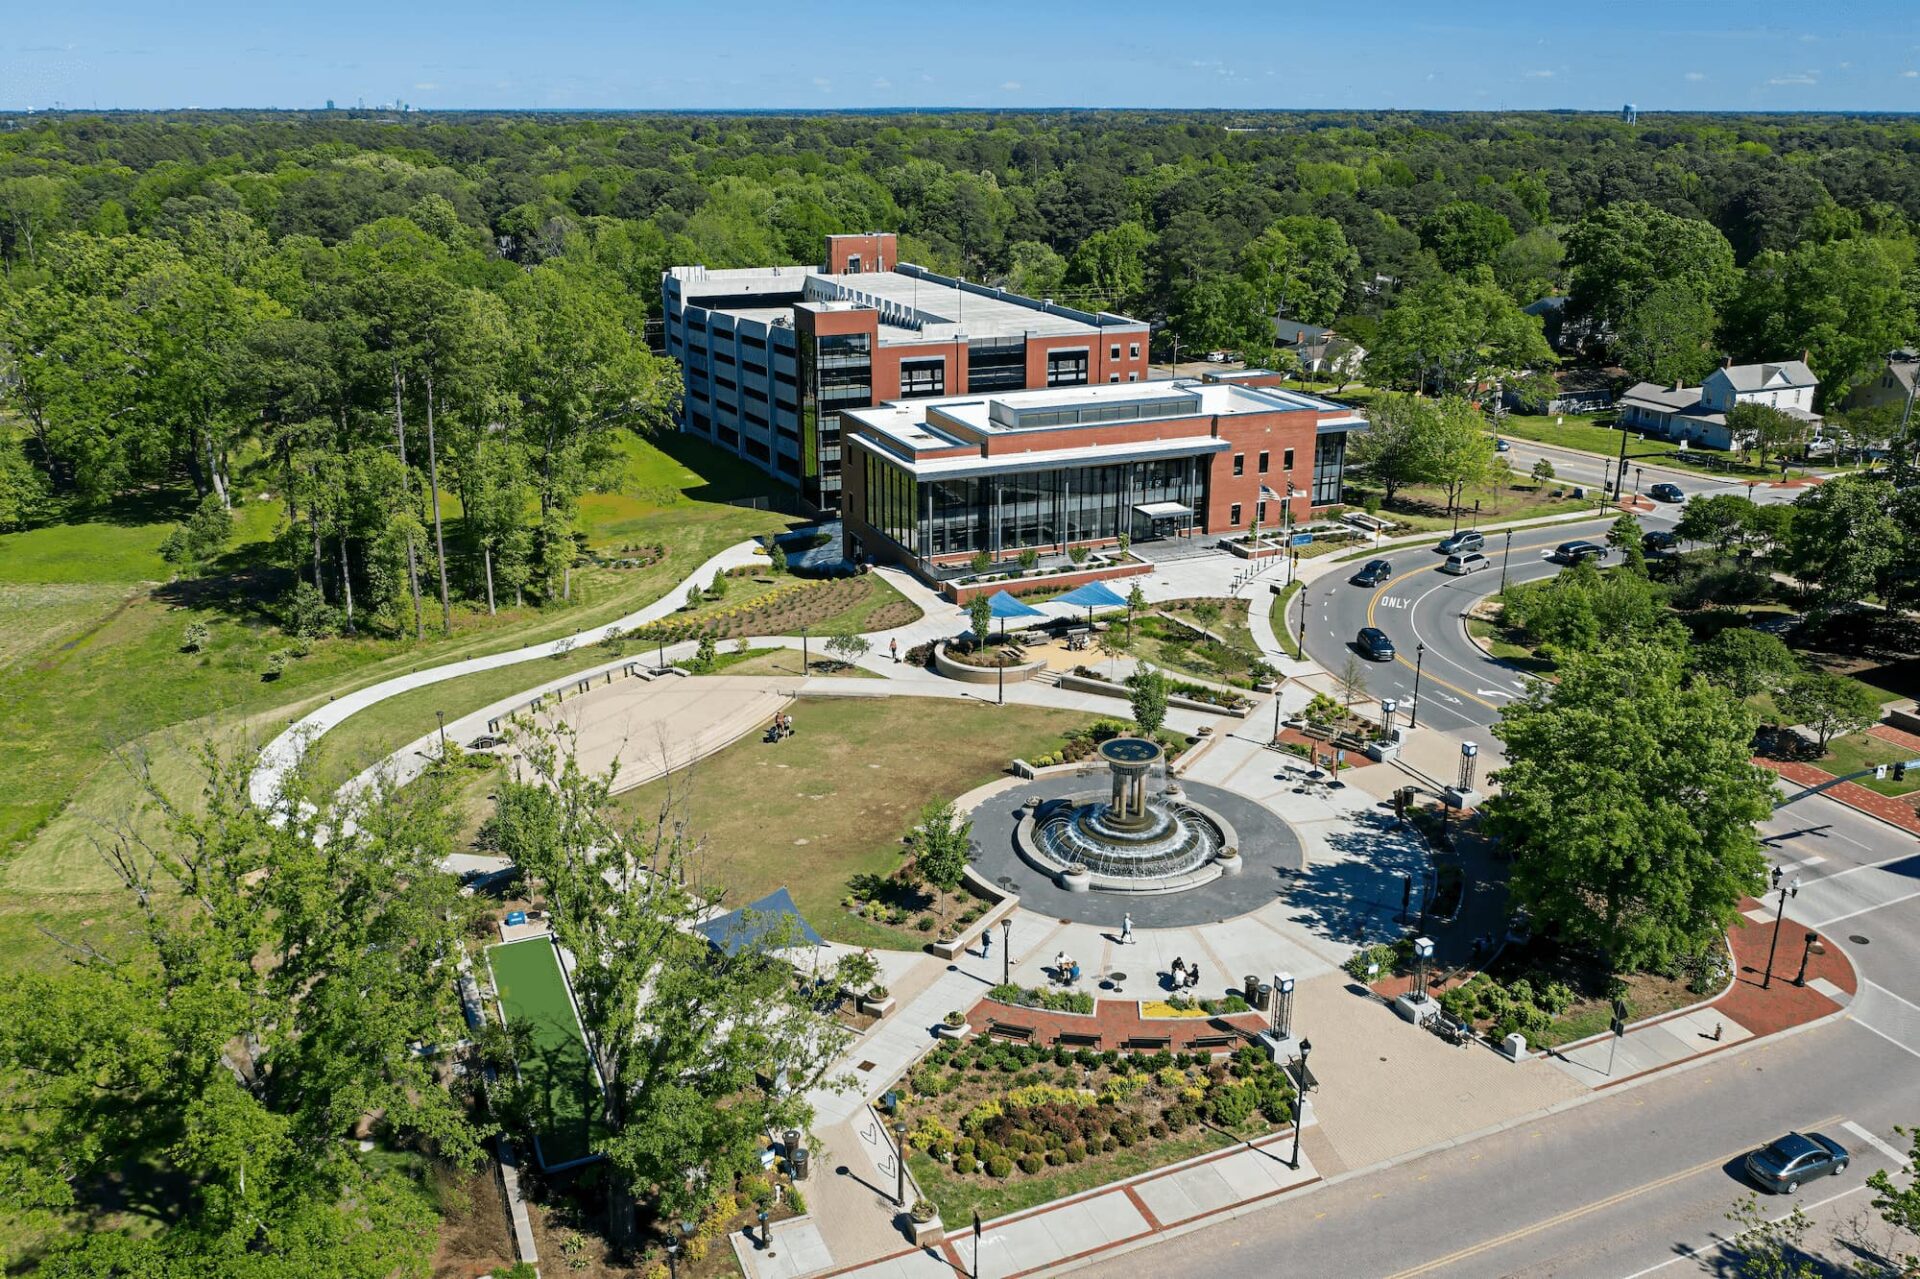 Aerial photo of downtown Cary, NC, showing off the beautiful landscaping.